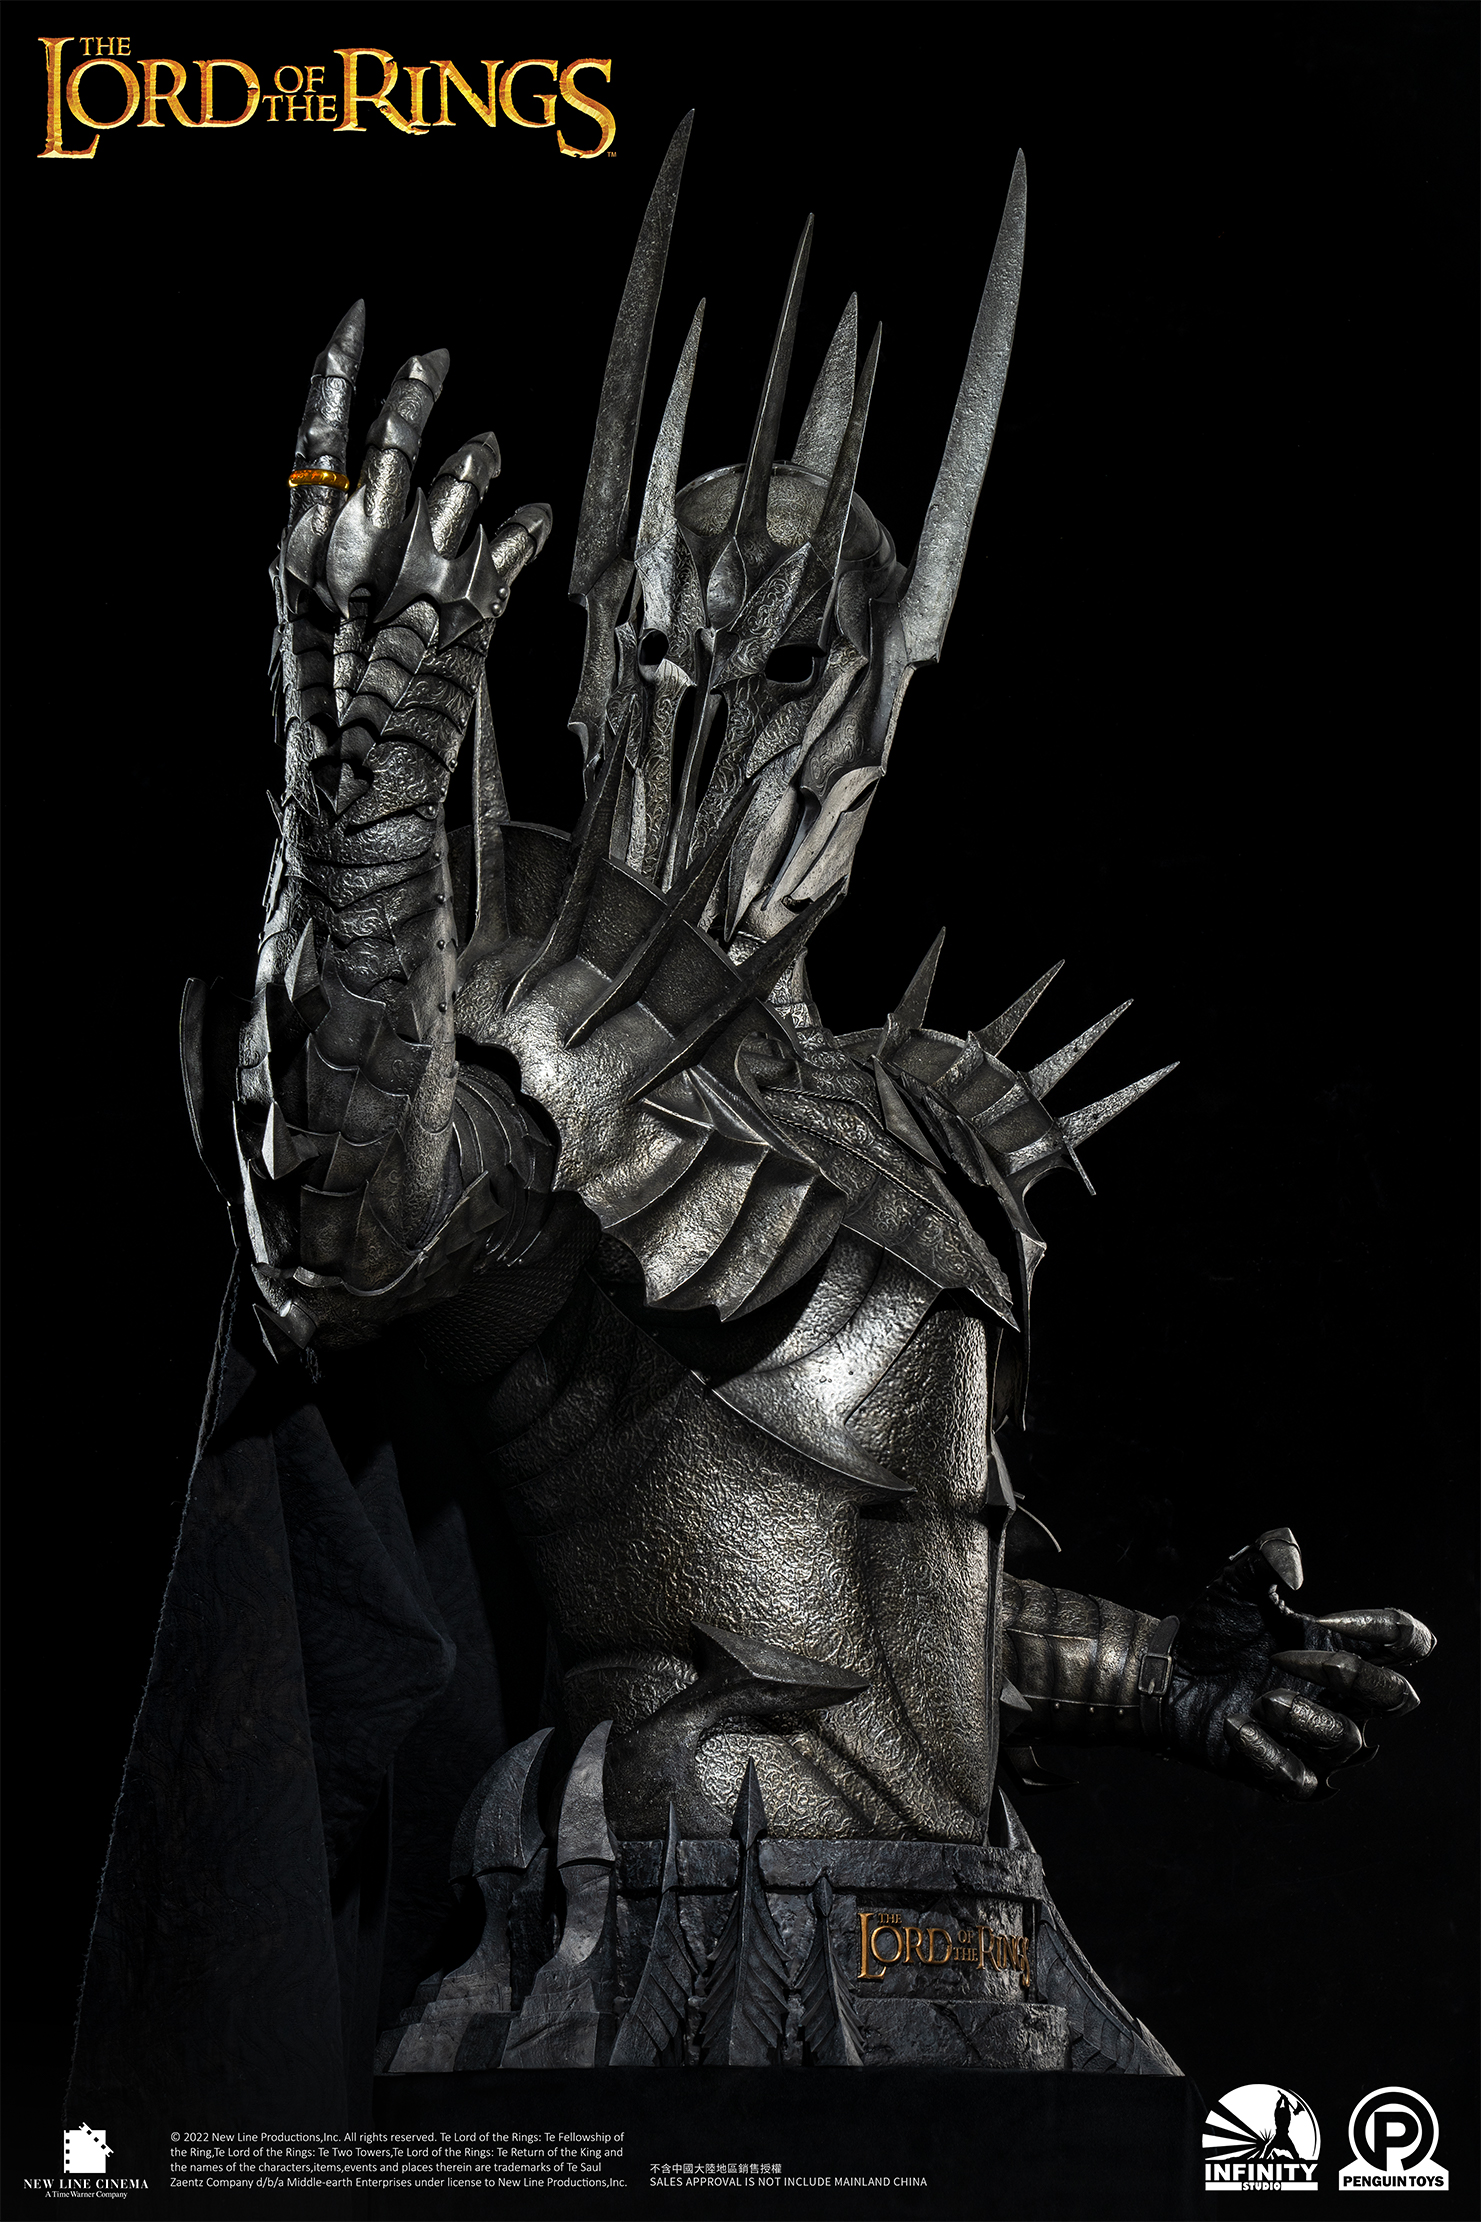 The Sauron™️ Ring of Power - Lord of the Rings